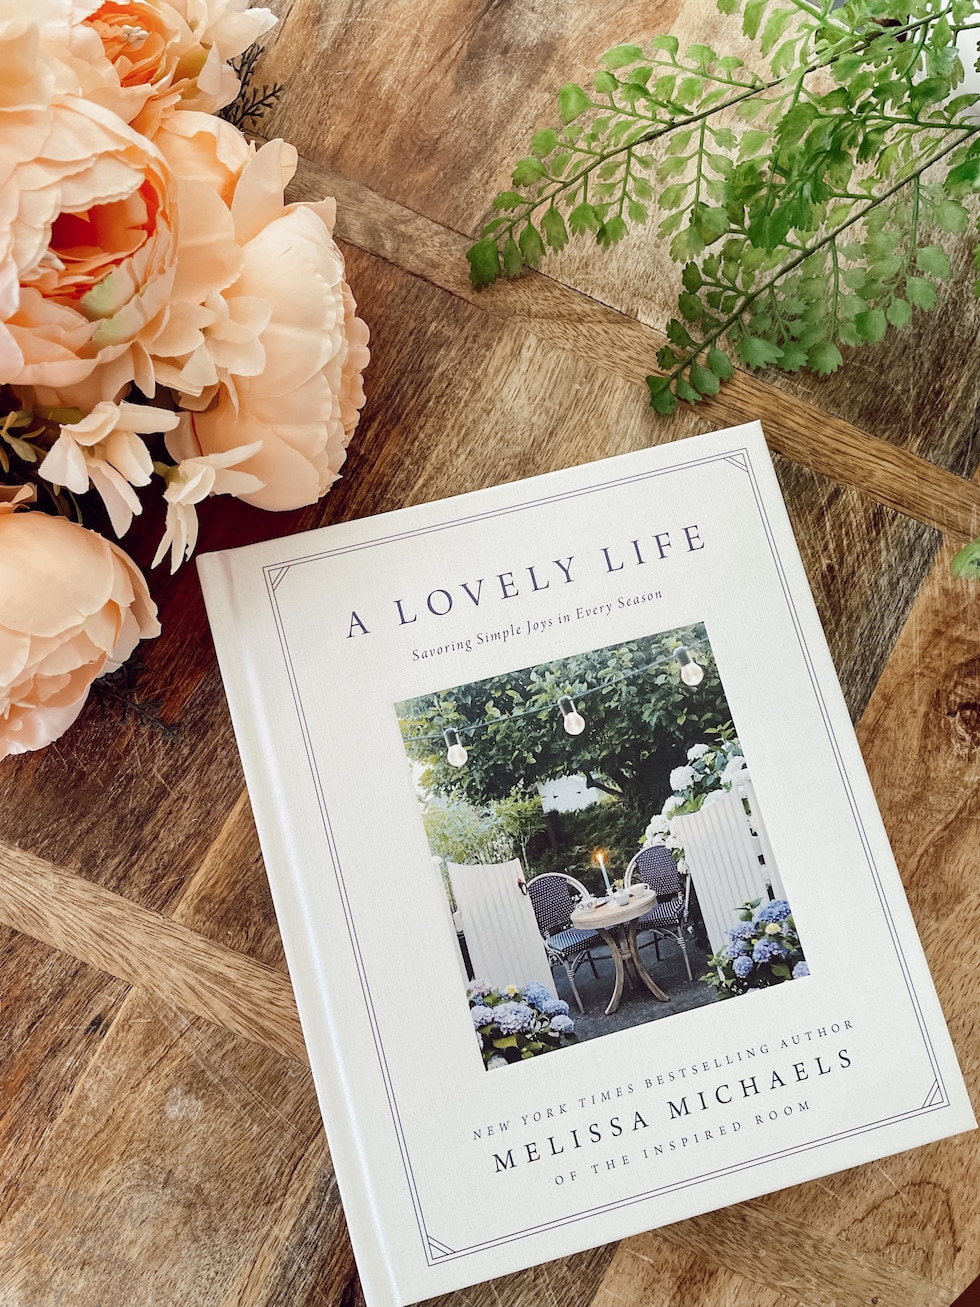 A Lovely Life Book: What Is It About?